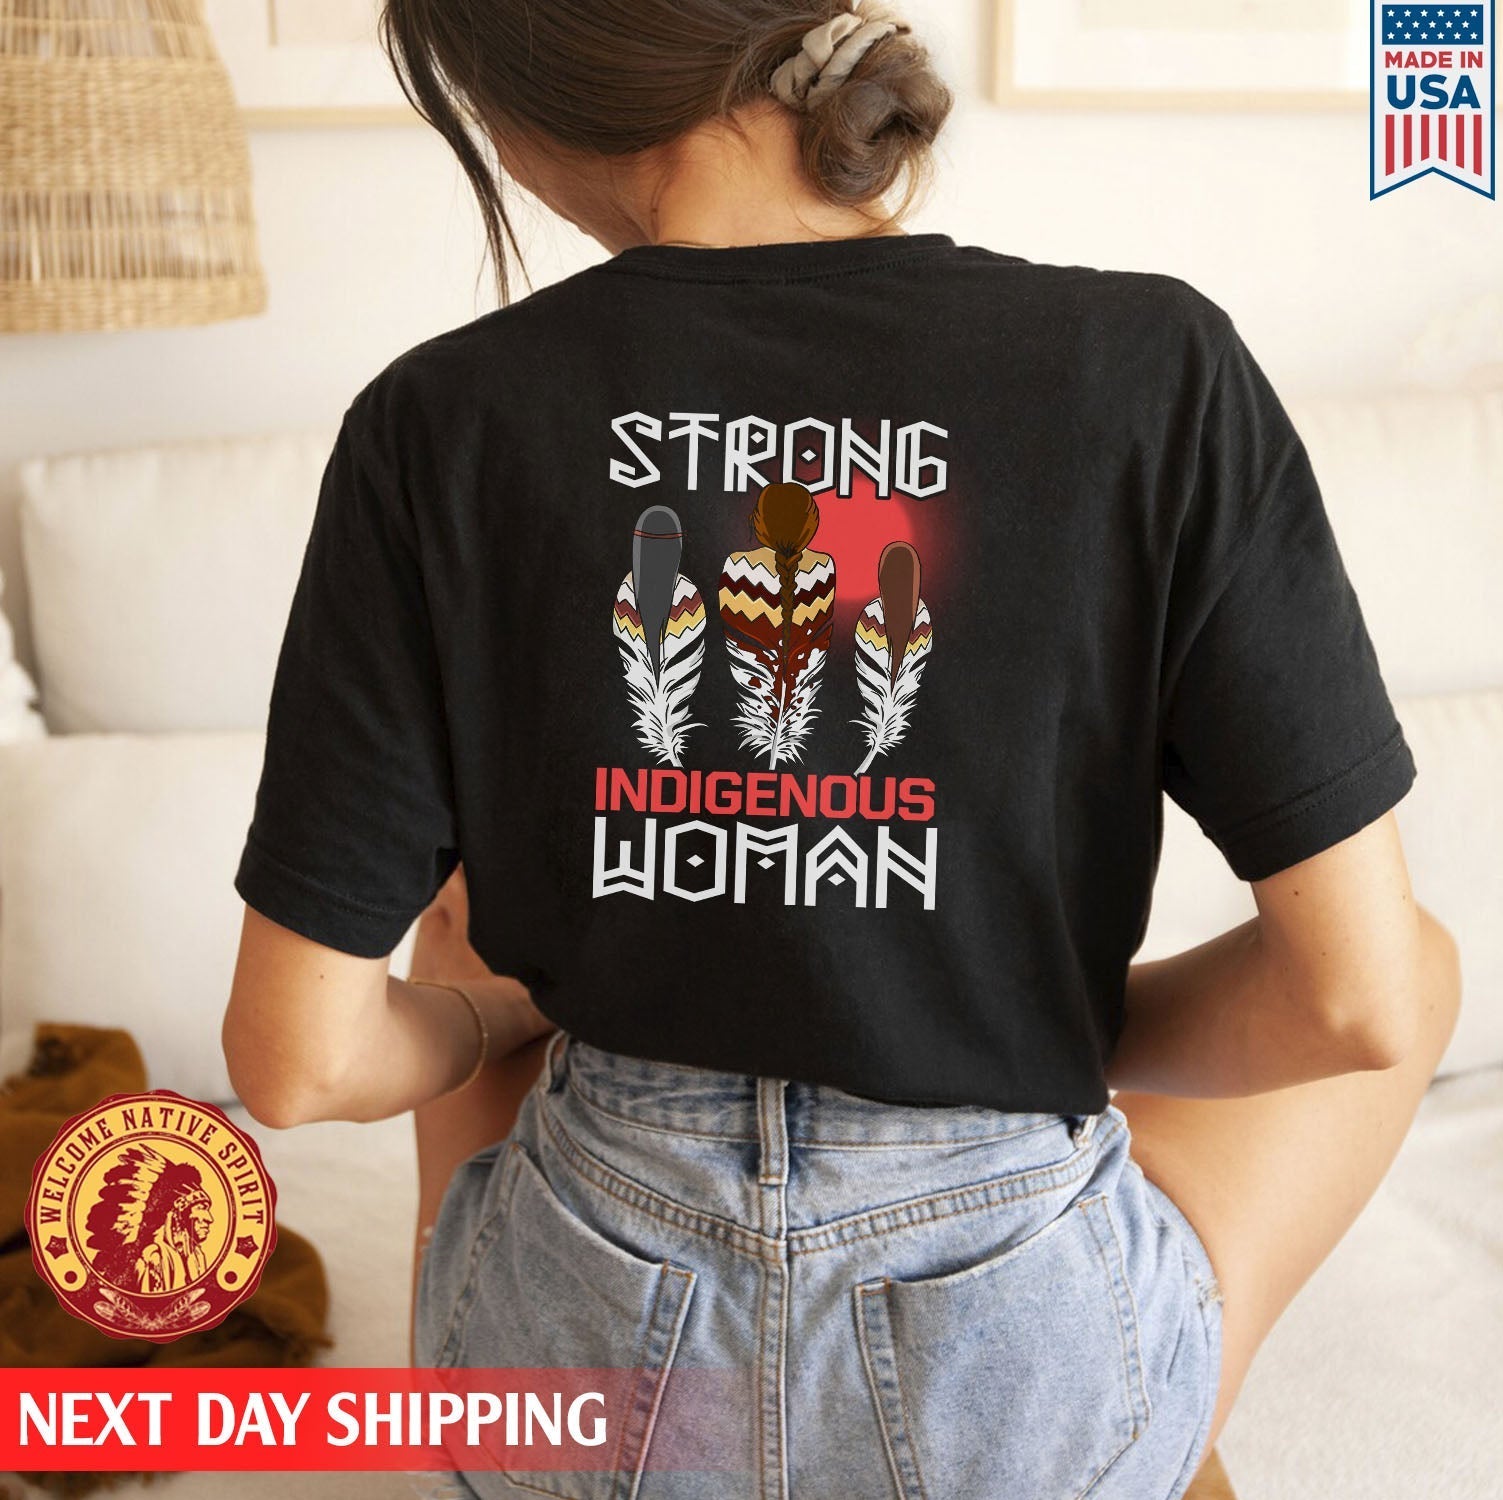 Strong Resilient Indigenous Woman Unisex Back T-Shirt/Hoodie/Sweatshirt 013